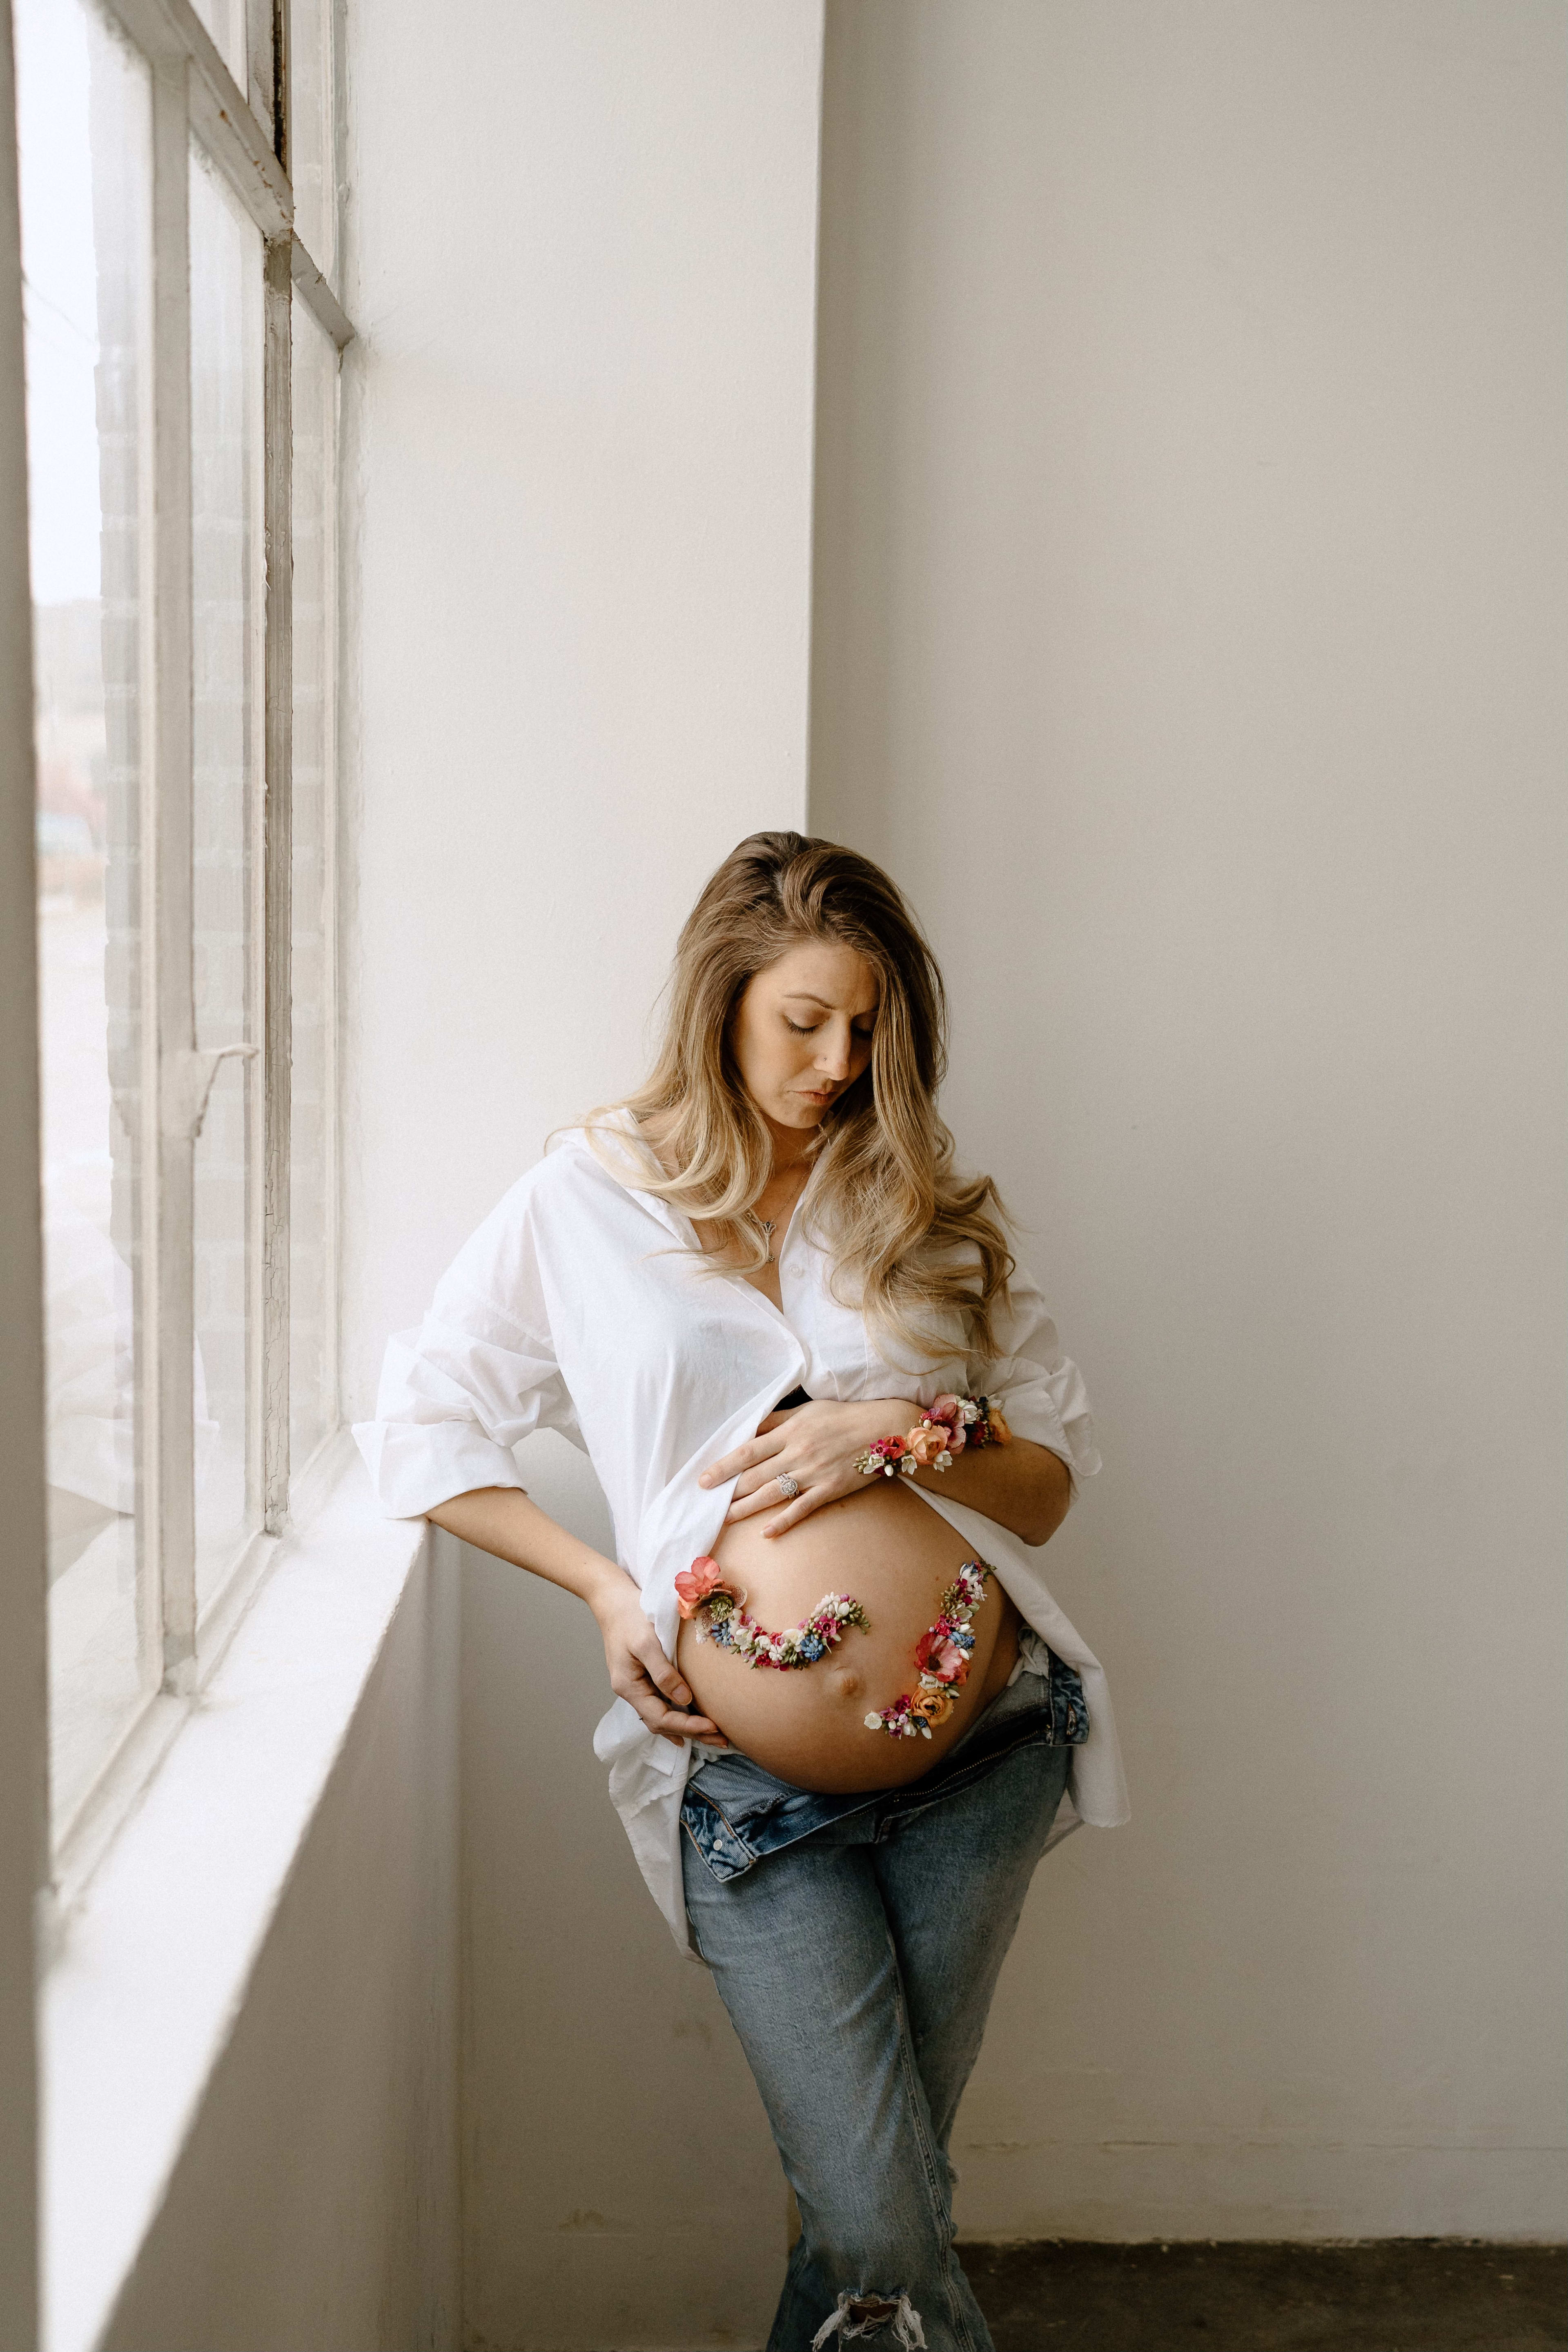 A boho-inspired maternity photoshoot featuring a white-clad pregnant woman leaning against a window sill.